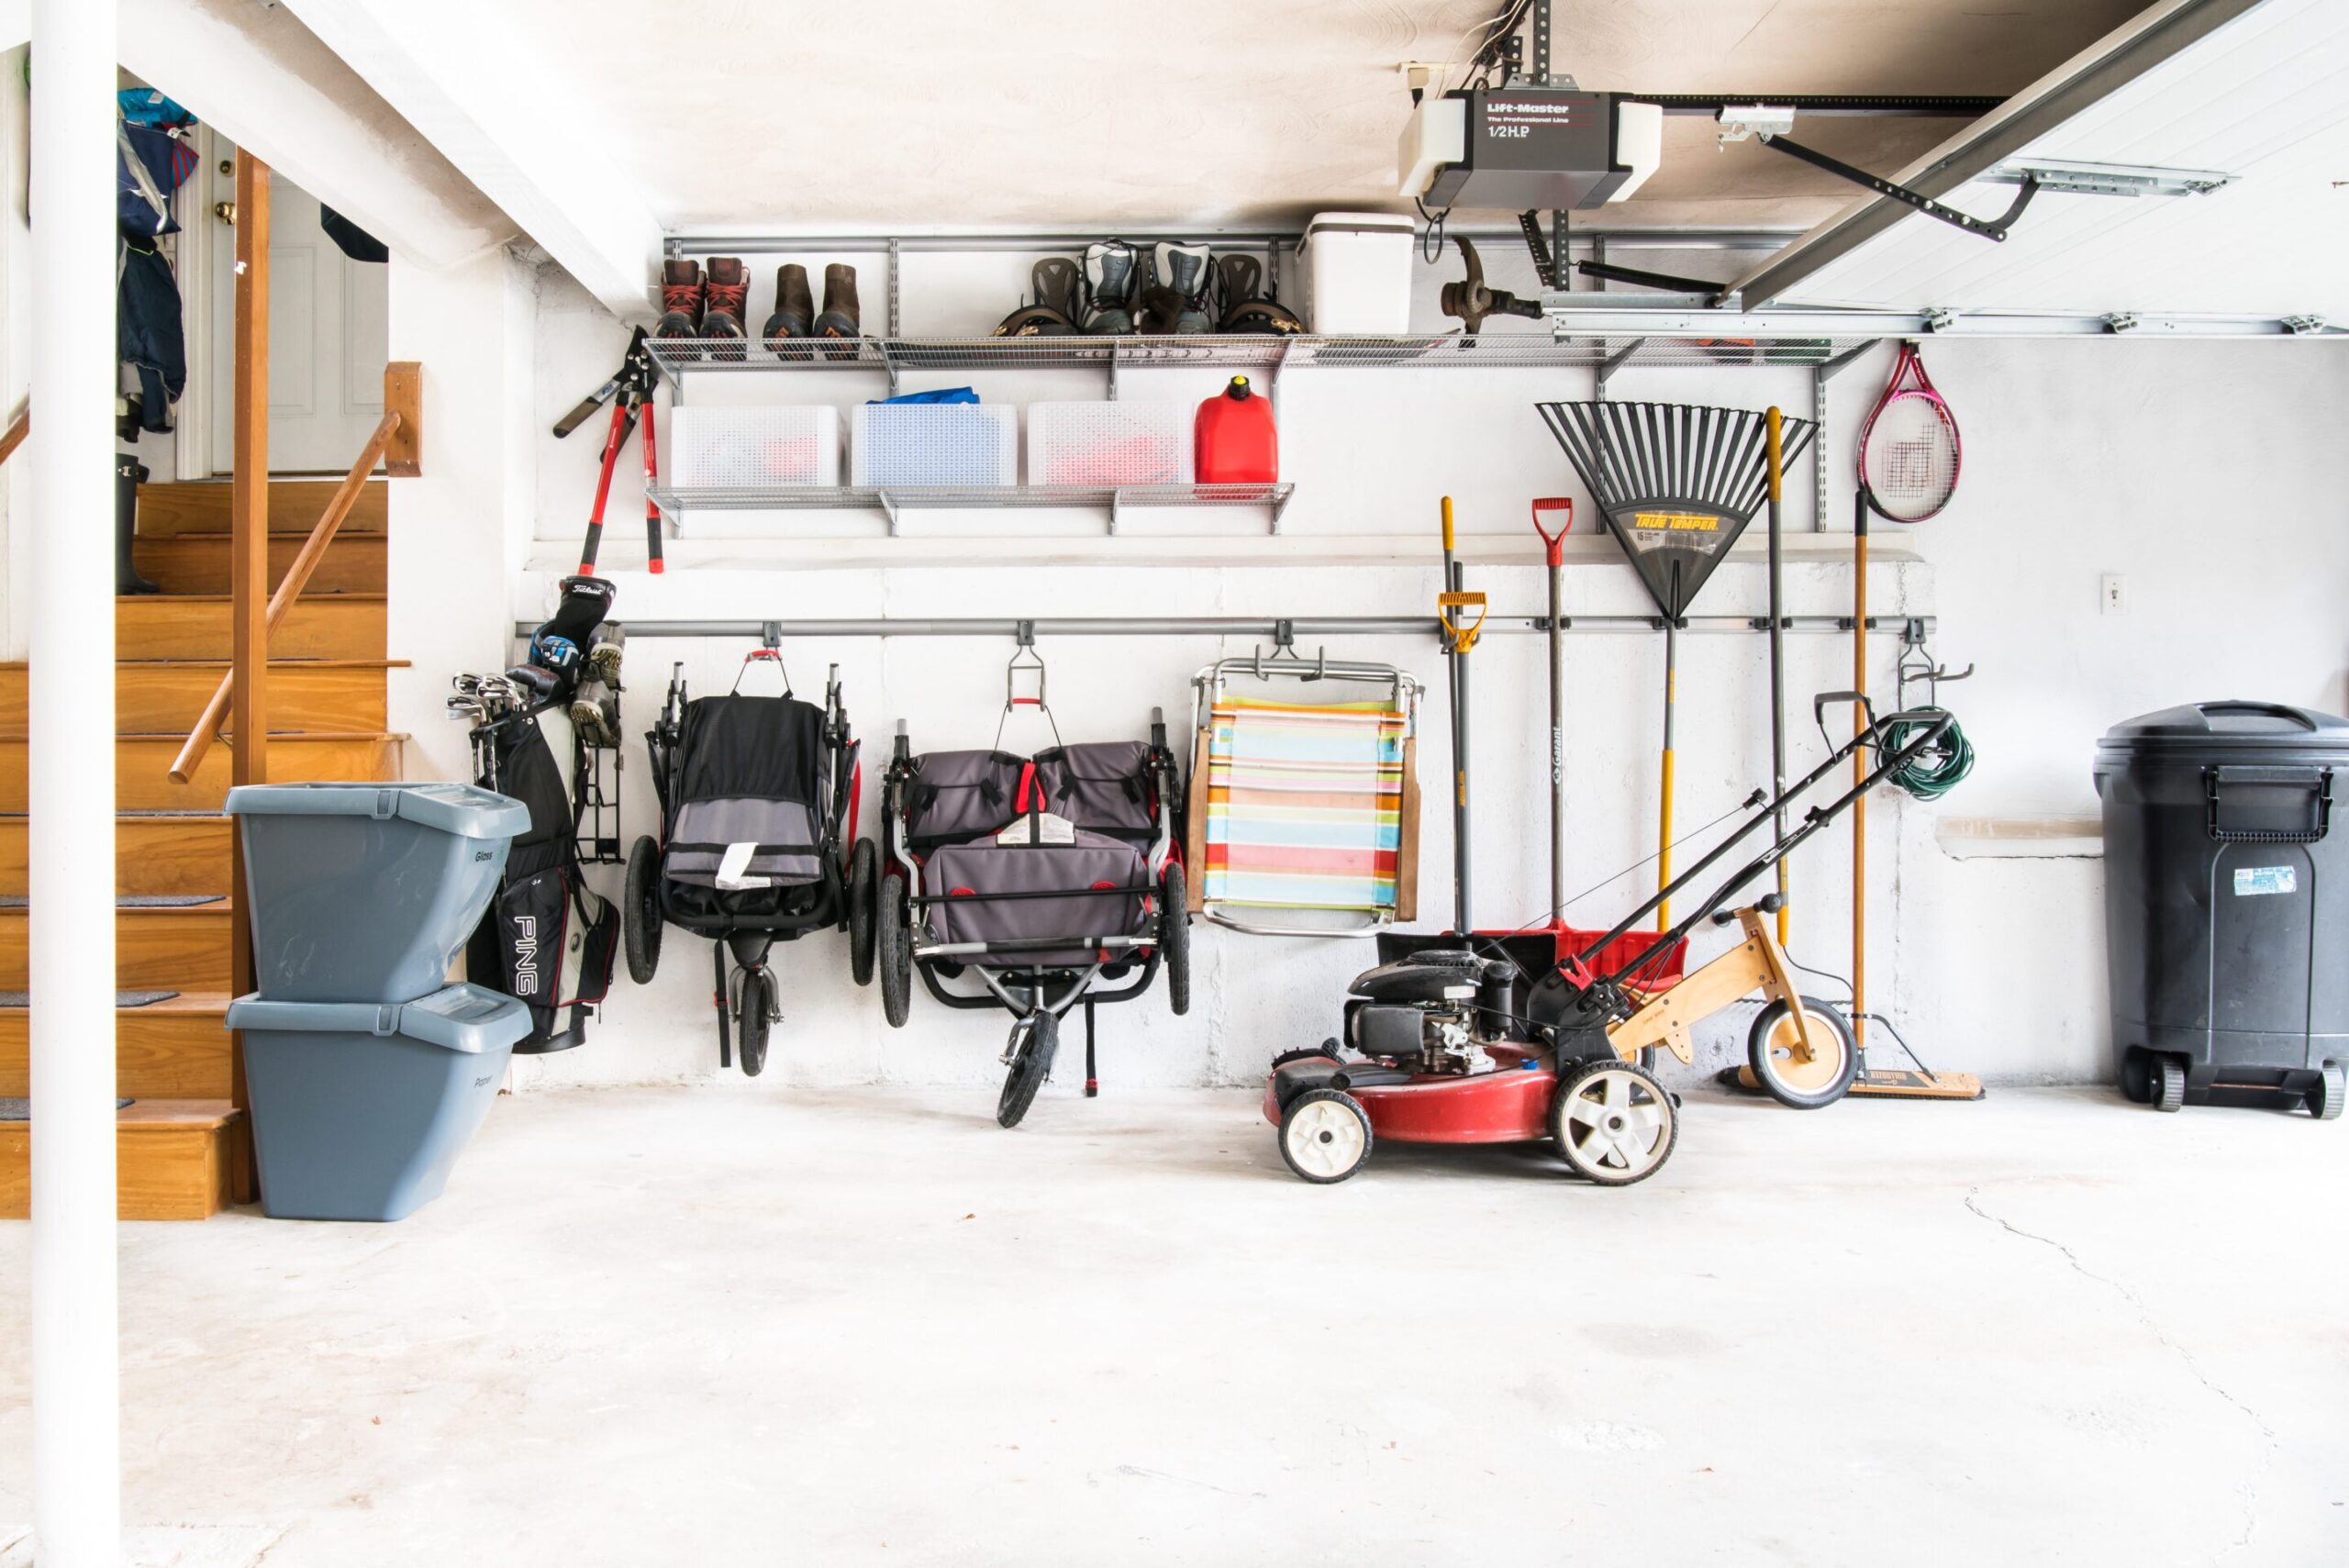 One wall of a garage, with built-in shelves and racks to hold various garden tools, strollers, boots, etc.